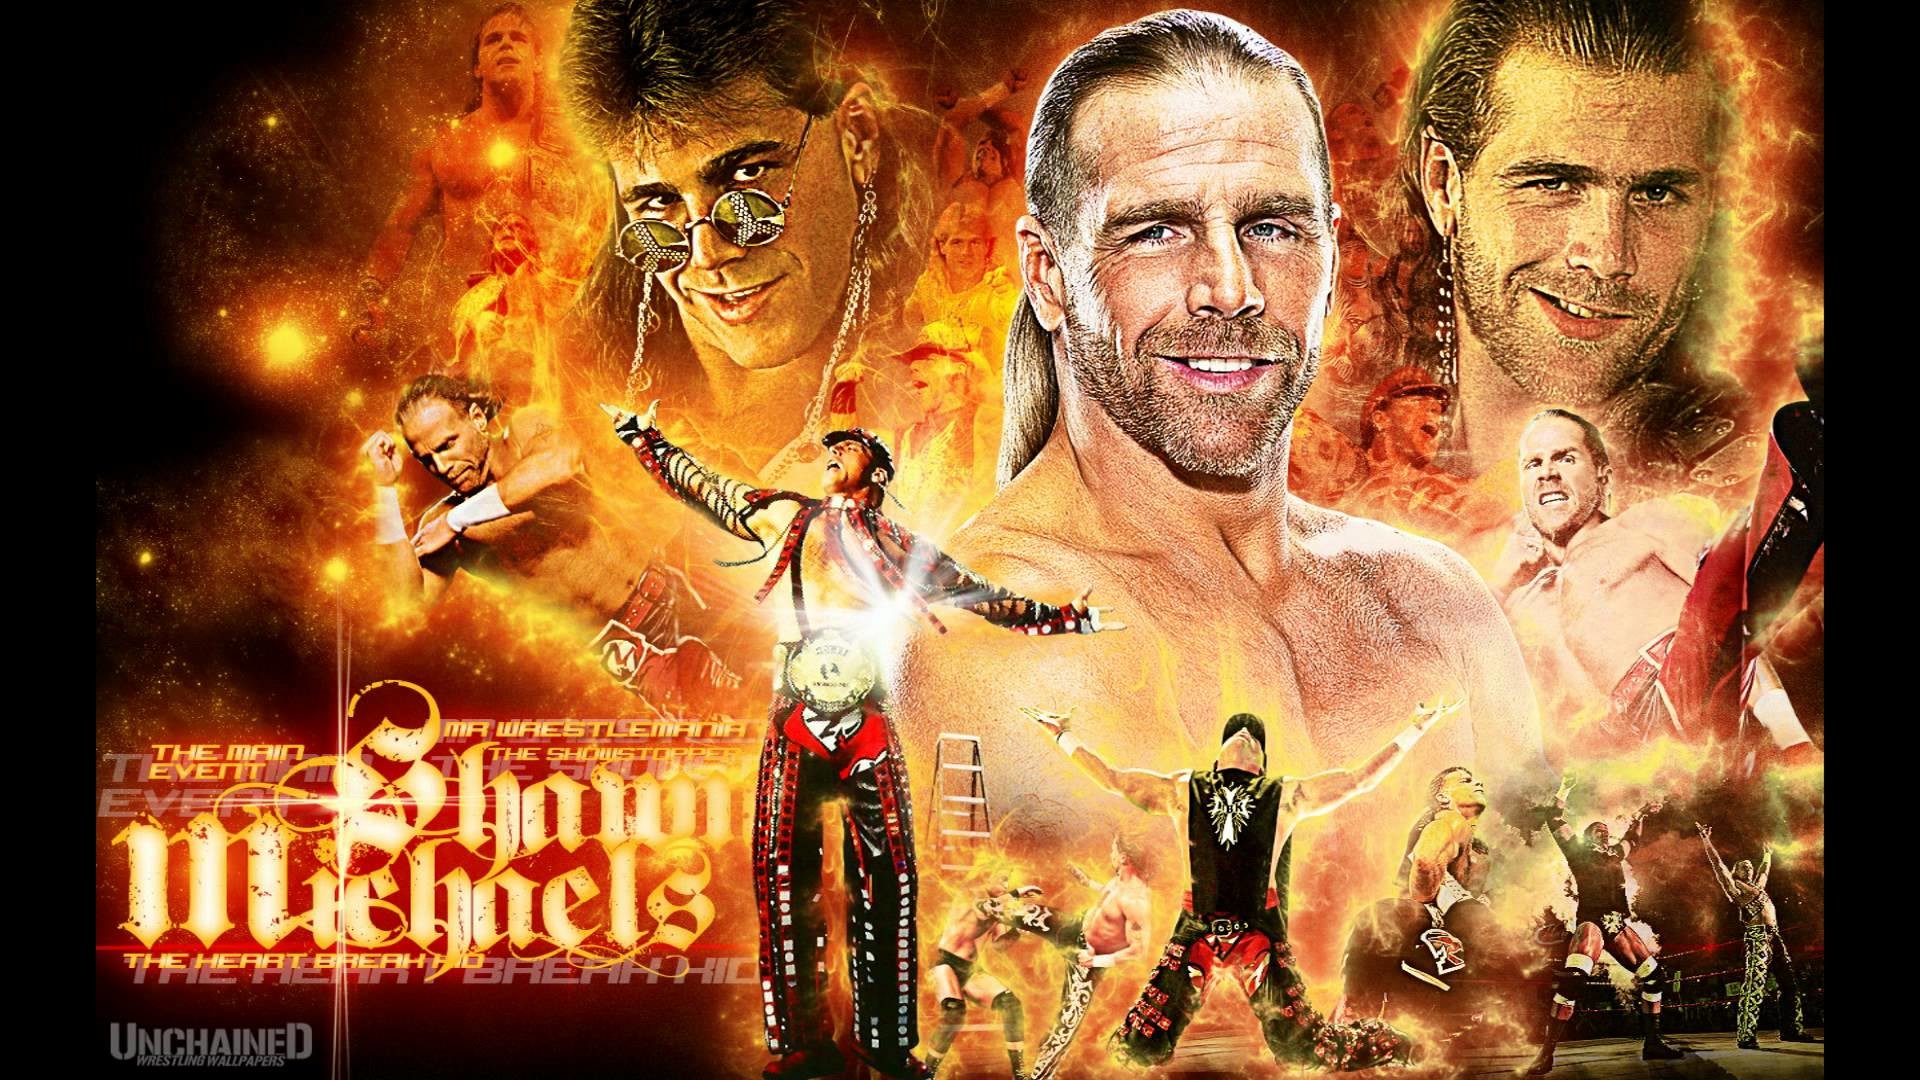 1920x1080 Shawn Michaels "HBK" Theme Song 2010 -Sexy Boy- (Arena Effect) with crowd -  YouTube